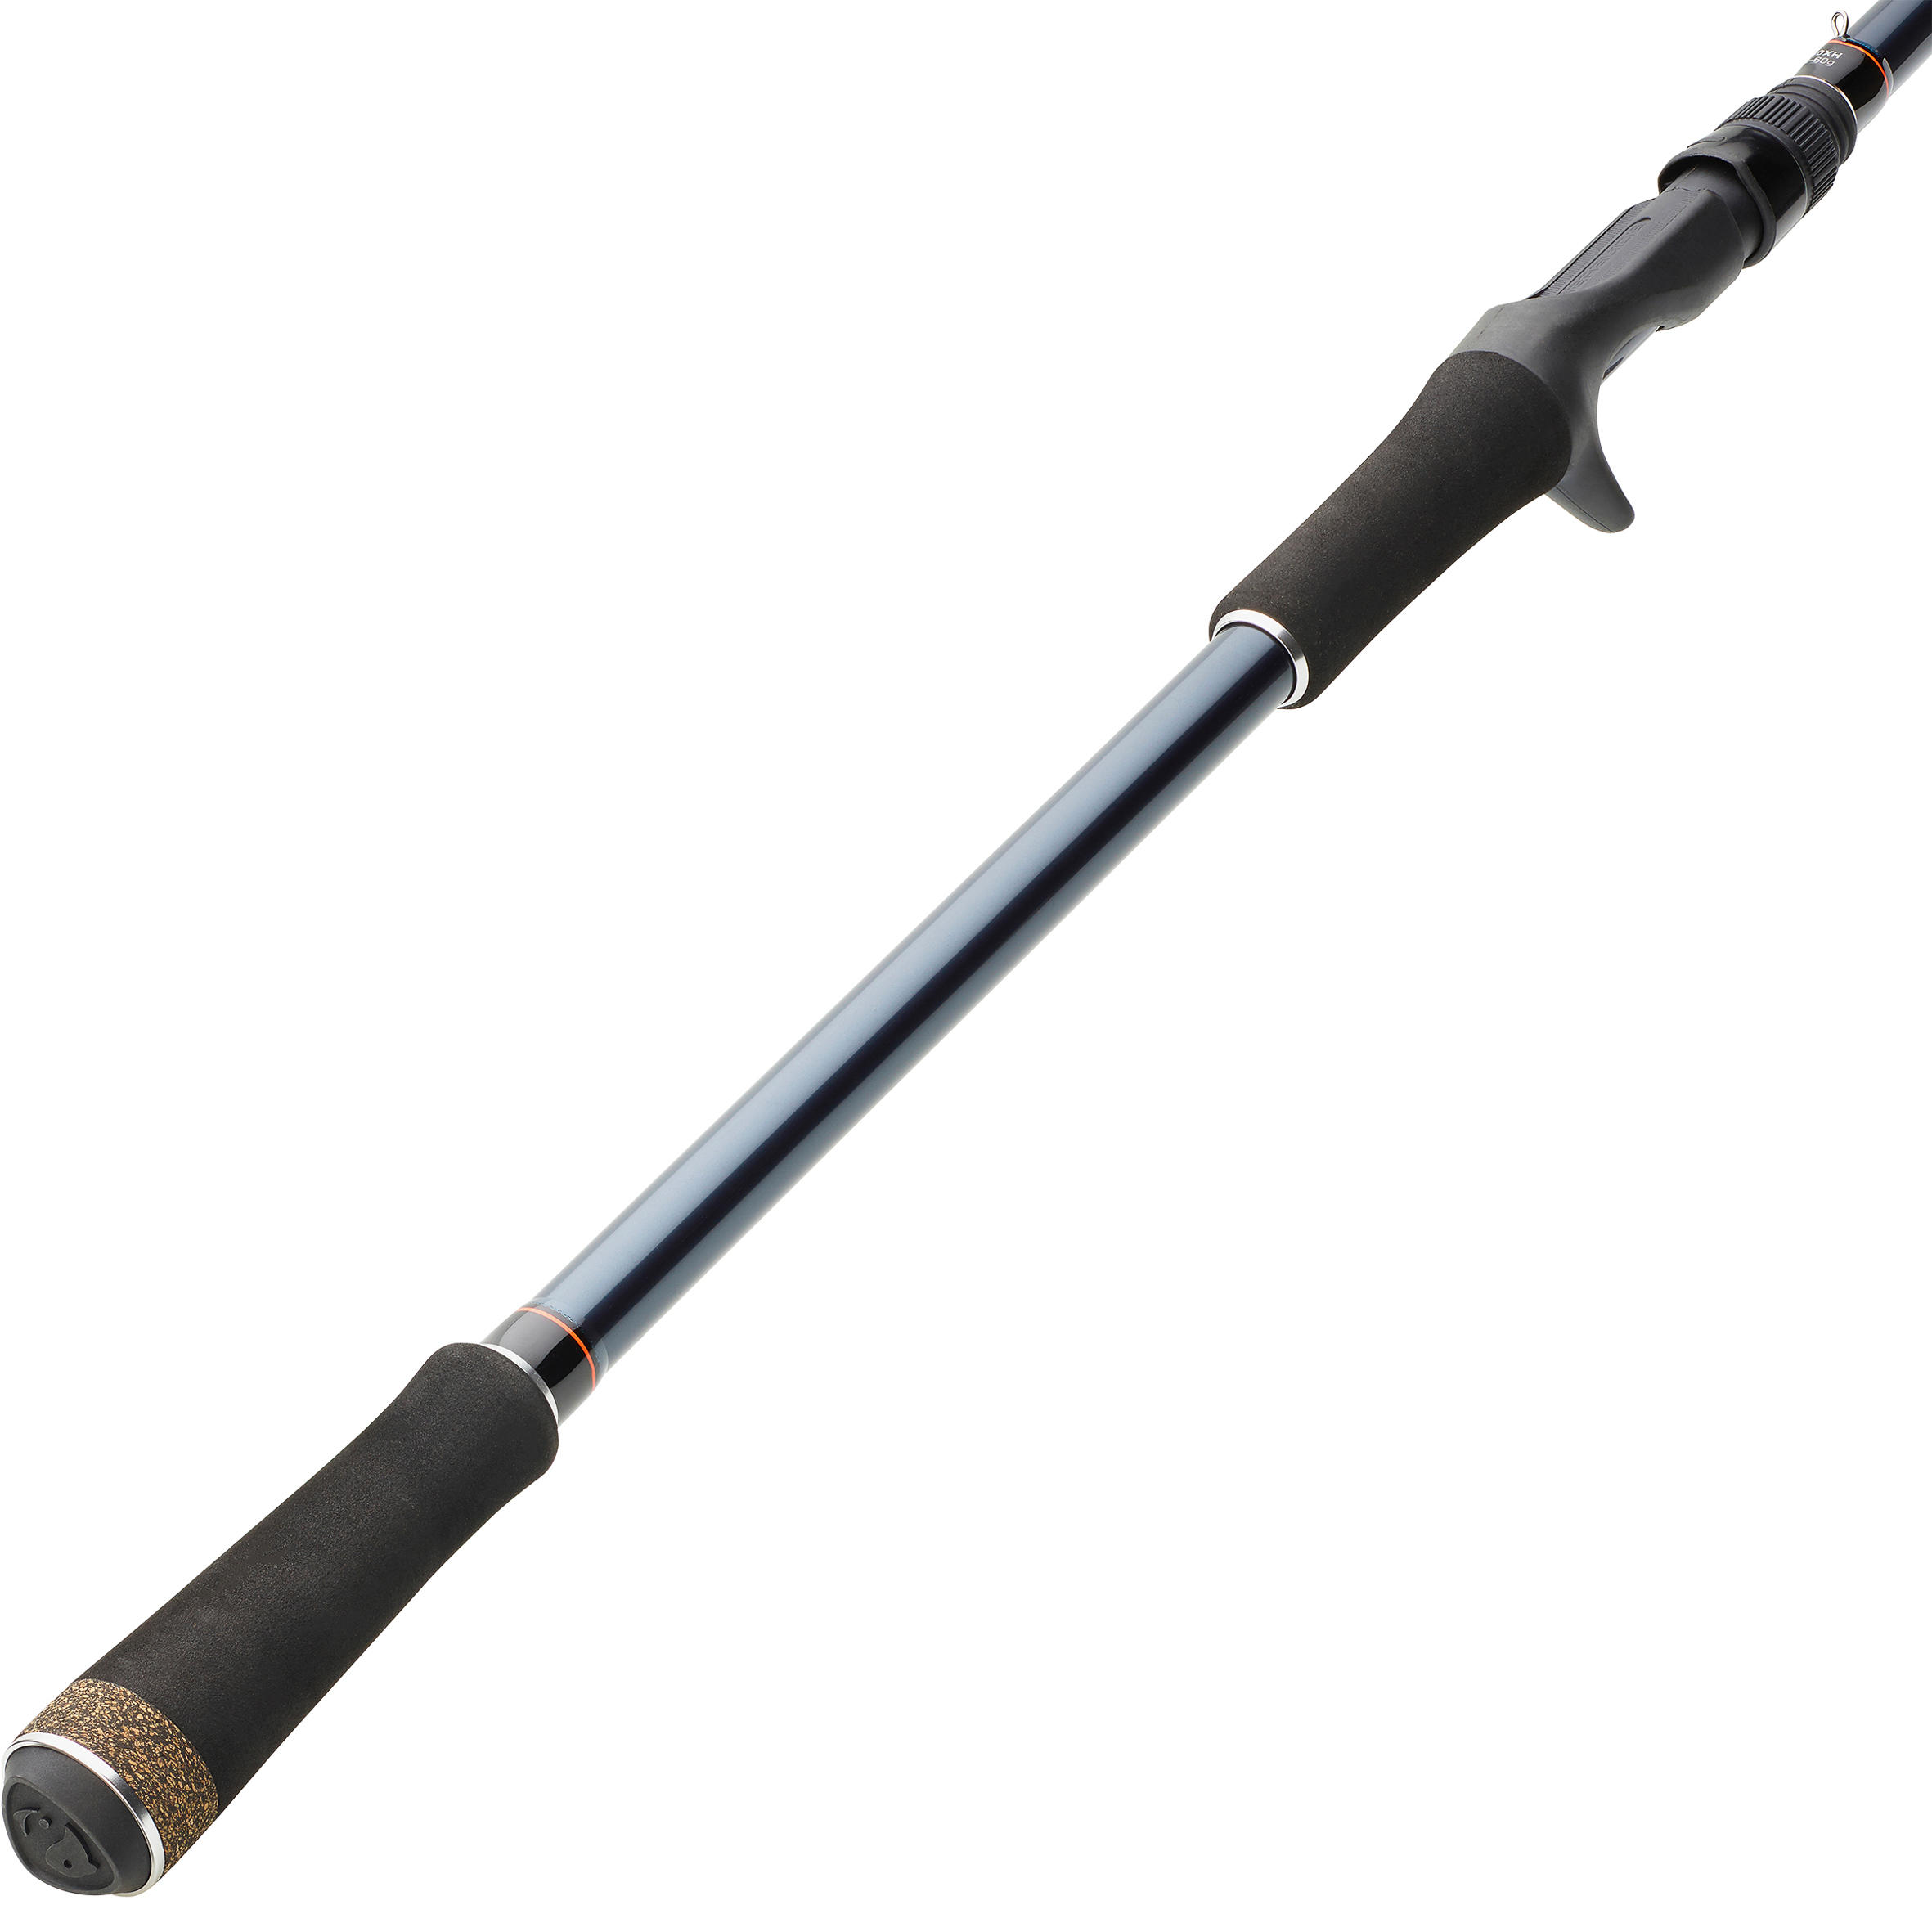 LURE FISHING CASTING ROD WIXOM-5 240XH CASTING 3/7